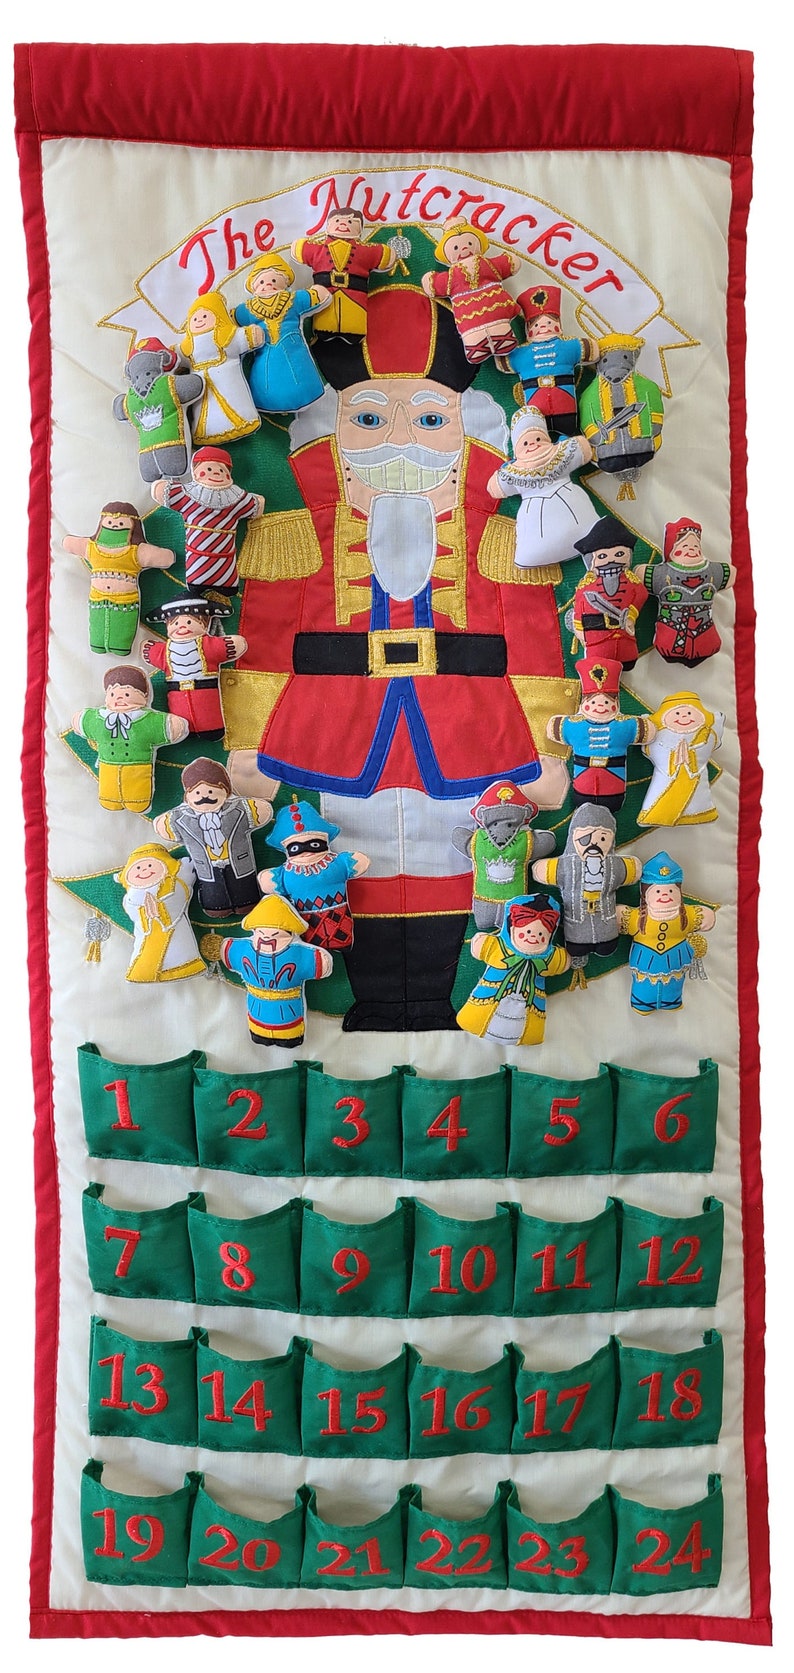 Nutcracker Fabric Advent Calendar, Classic Design Christmas Family Countdown with 24 Ornaments by Pockets of Learning image 1